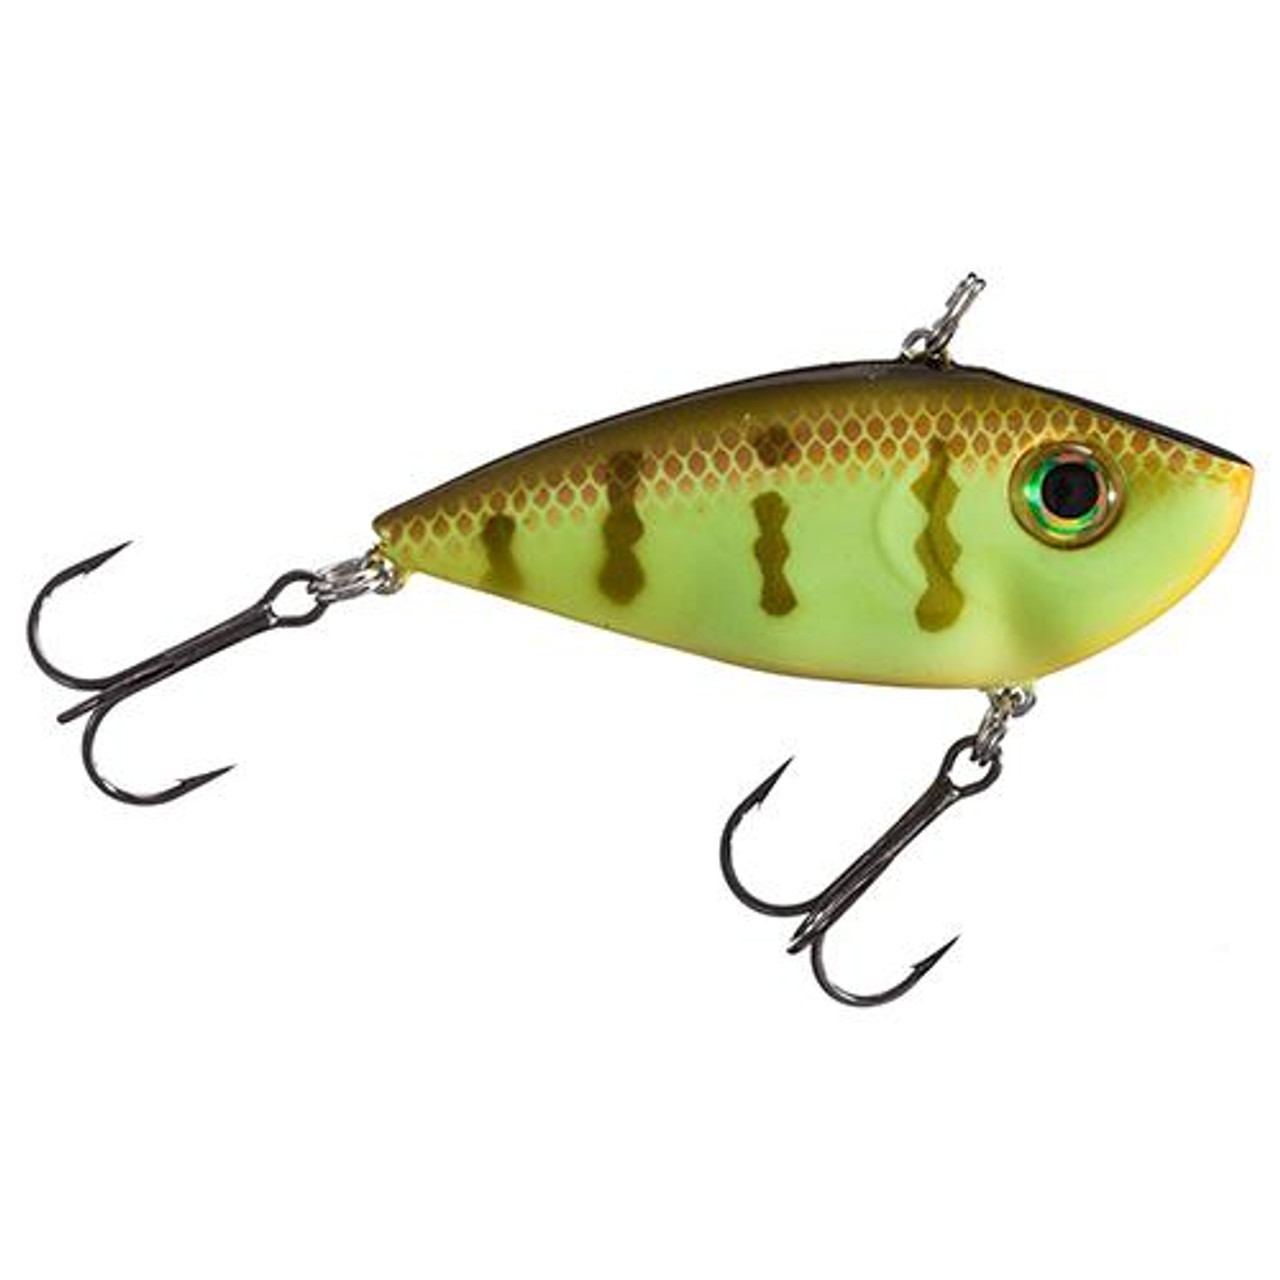 Strike King Lures Red Eyed Shad 1/2 oz Hard Lipless Crankbait Lure 3 1/4  Length. 8' Depth, Two Number 6 Treble Hooks, Chartreuse Perch, Per 1, REYESD12-650